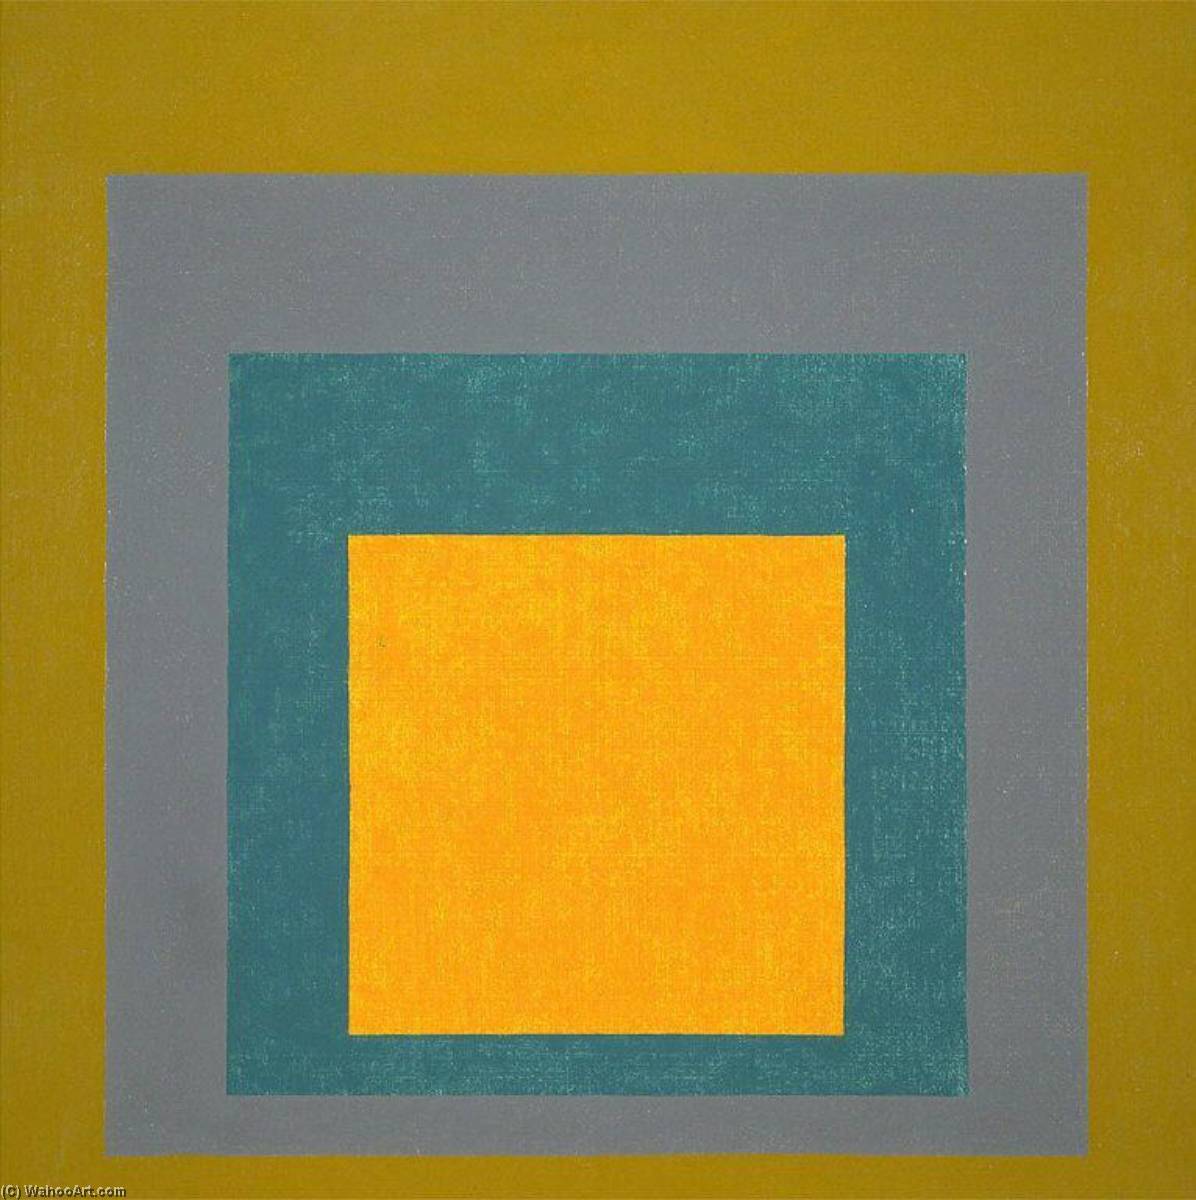 Order Paintings Reproductions Homage to the Square Elected II, 1961 by Josef Albers (Inspired By) (1888-1976, Germany) | ArtsDot.com